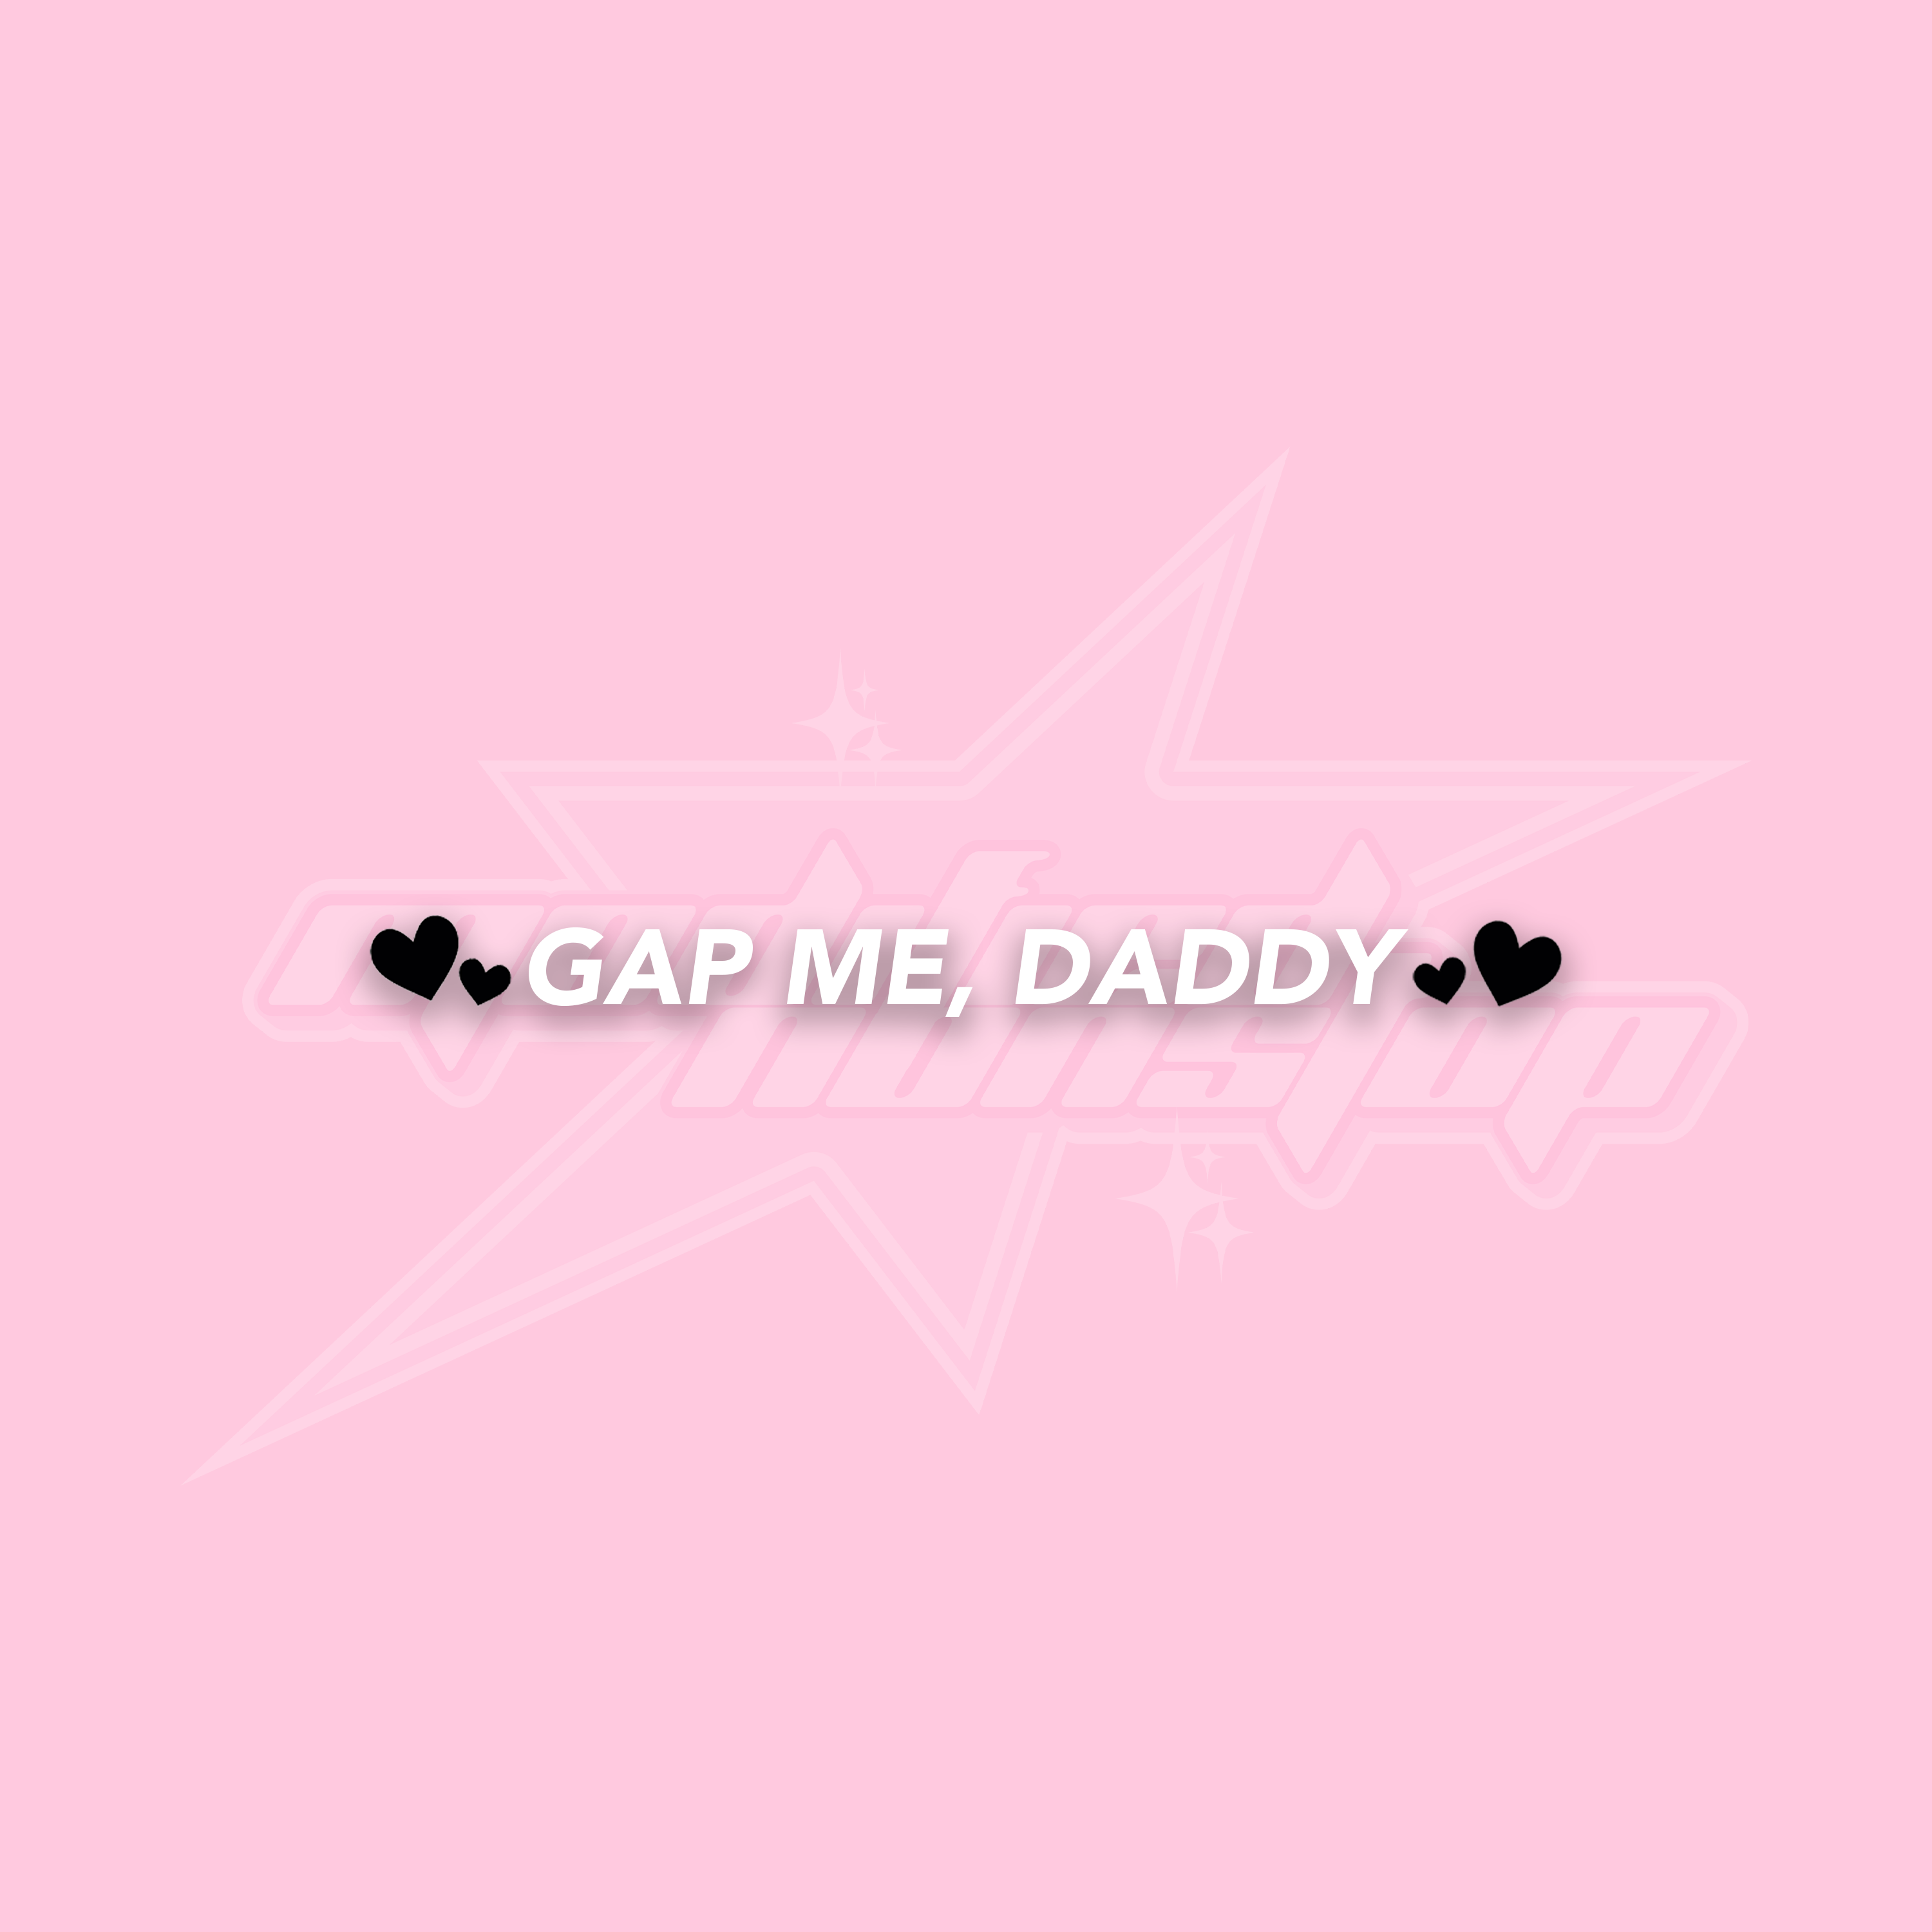 Gap Me, Daddy (side view mirror)